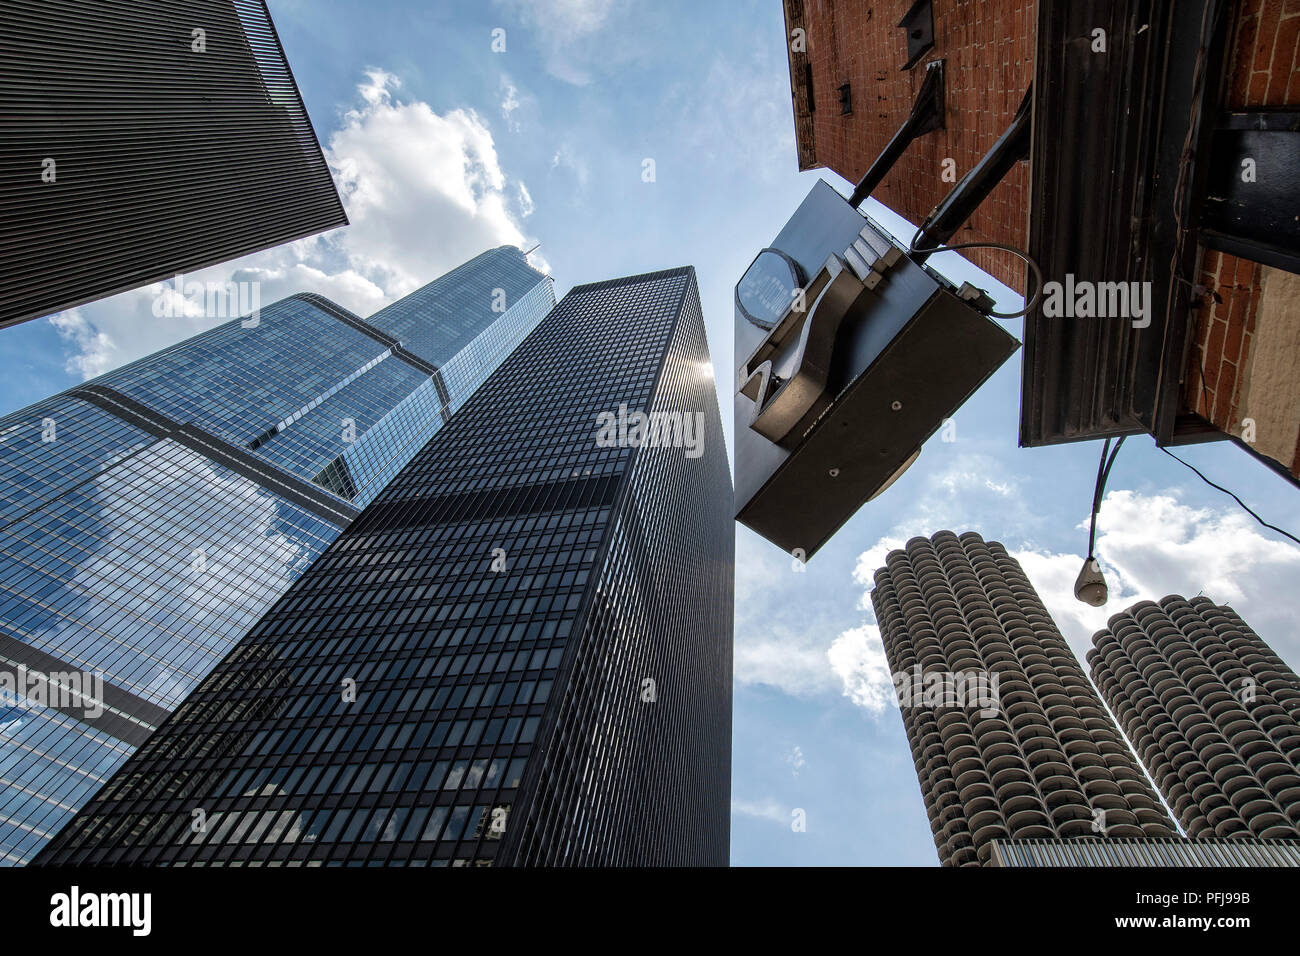 Downtown Chicago skyscrapers, (from right) Marina Towers, The Langham, Trump Tower. Stock Photo